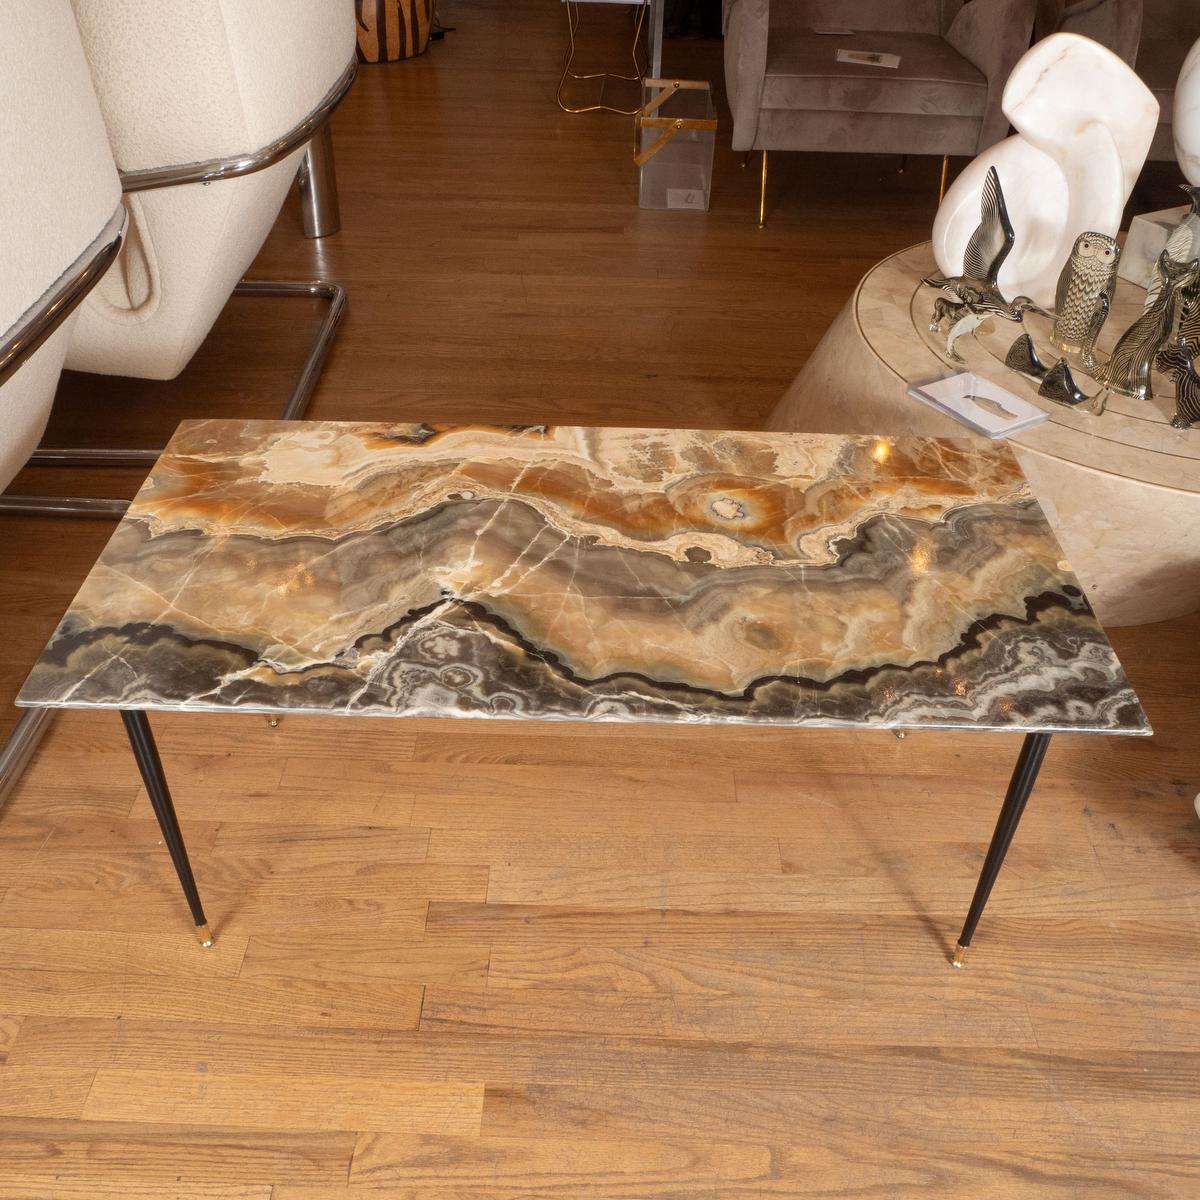 Rectangular coffee table with black metal legs and brass feet.